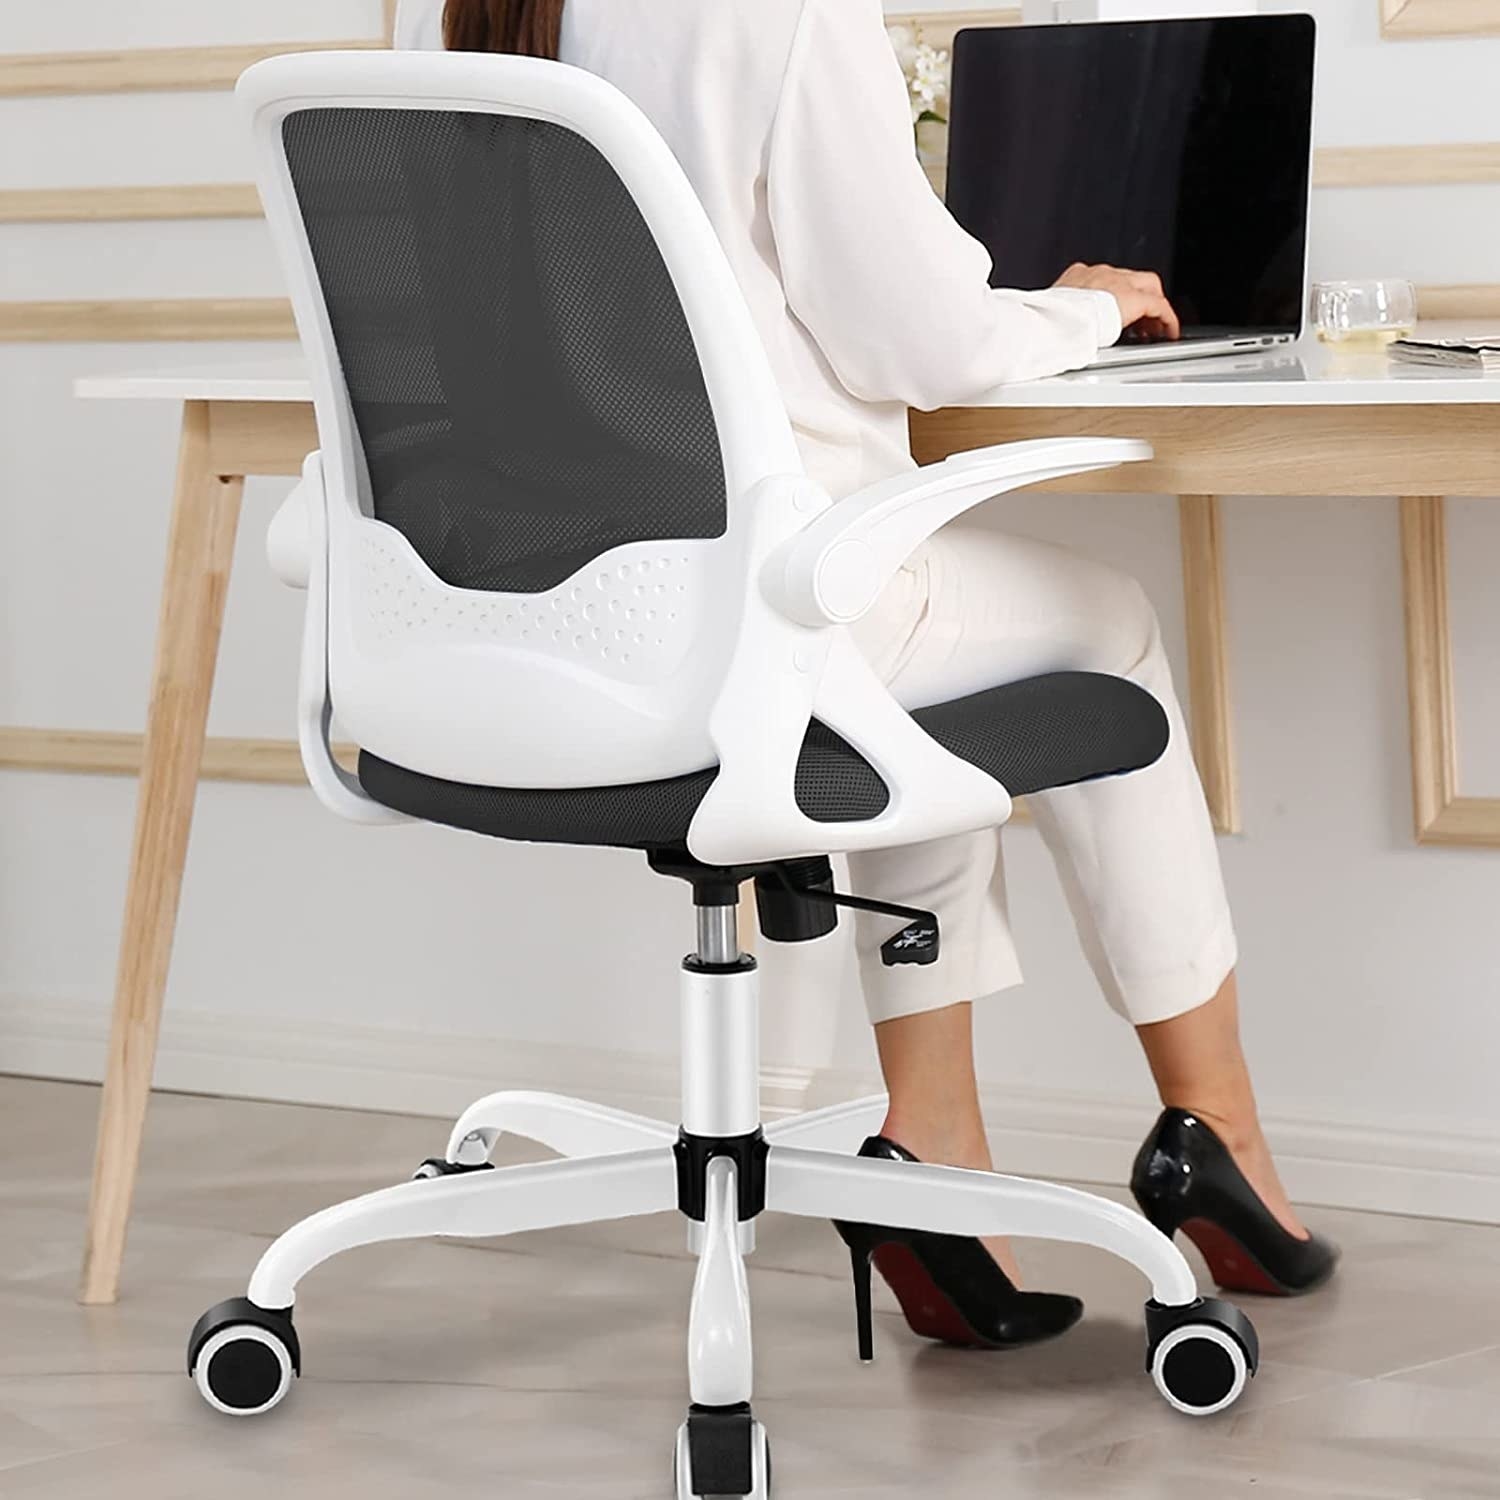 a person sitting on the office chair while working at a desk